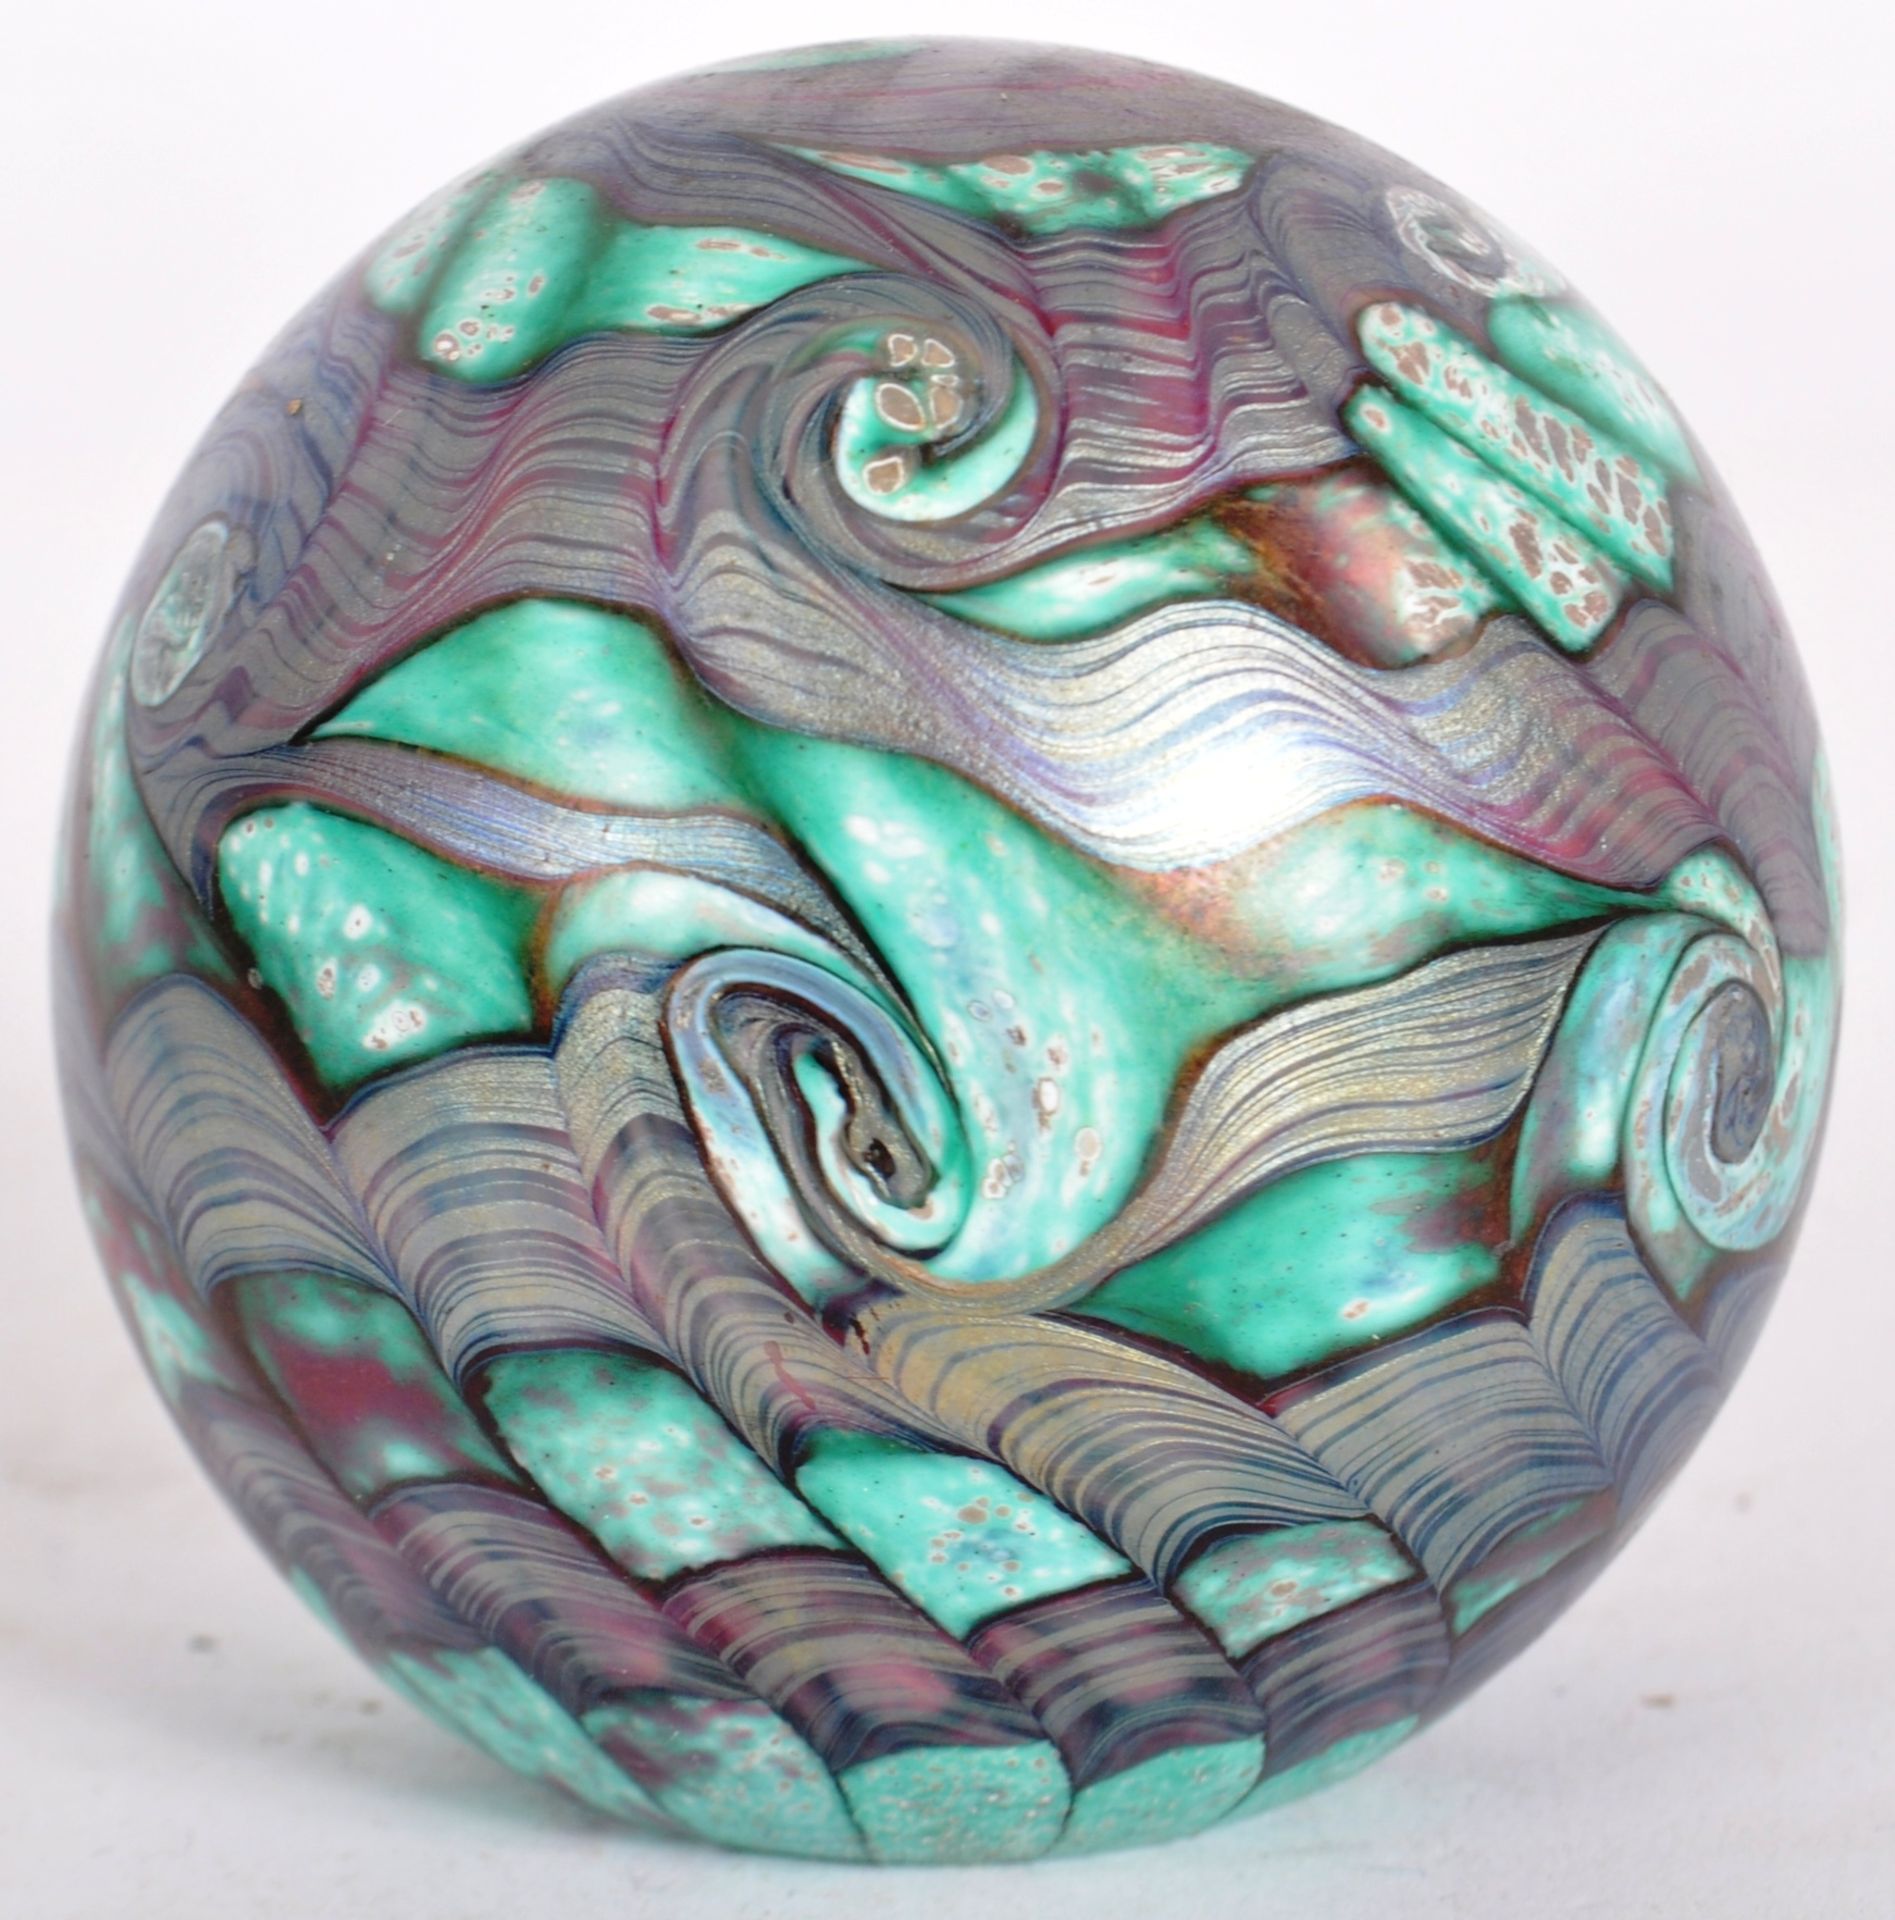 MICHAEL HARRIS FOR ISLE OF WIGHT - GLASS PAPERWEIGHT - Image 2 of 9